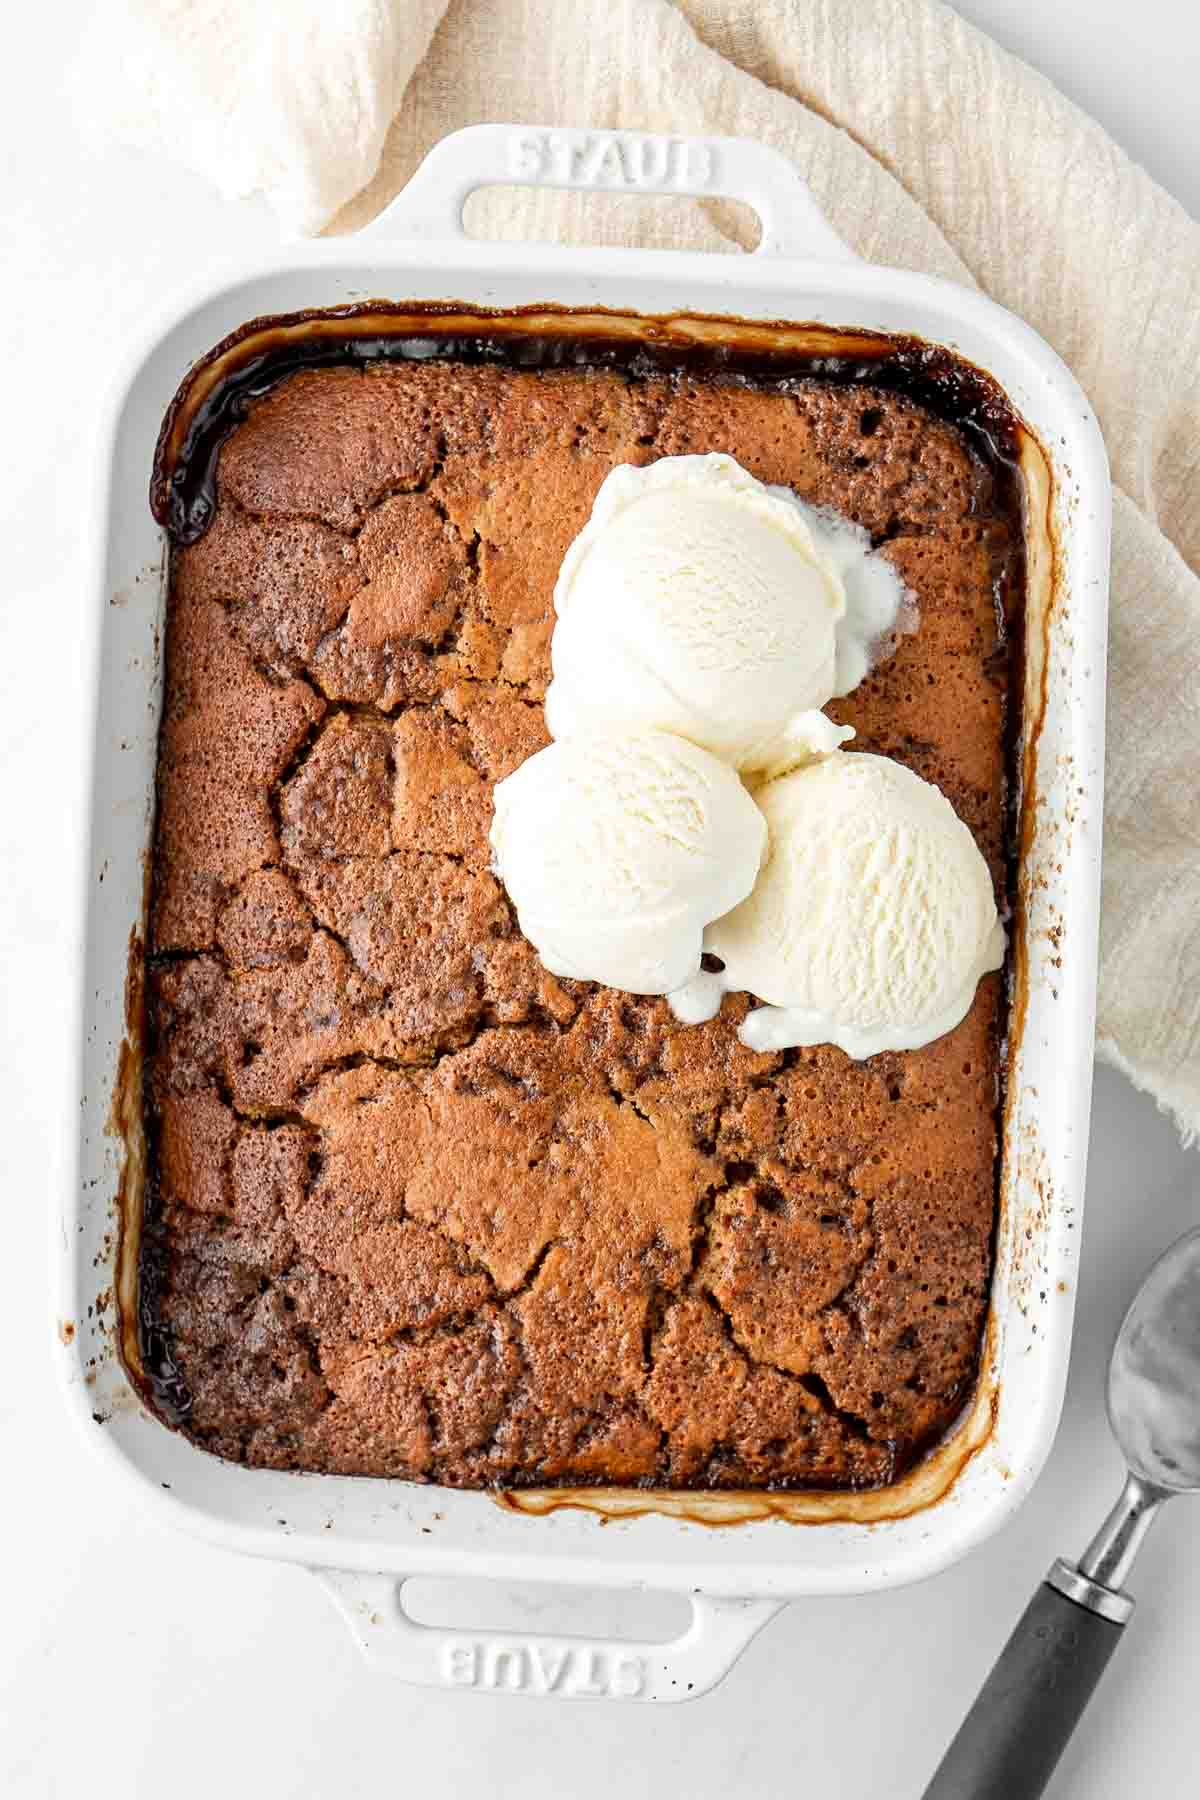 Freshly baked butterscotch pudding from the oven with ice cream.